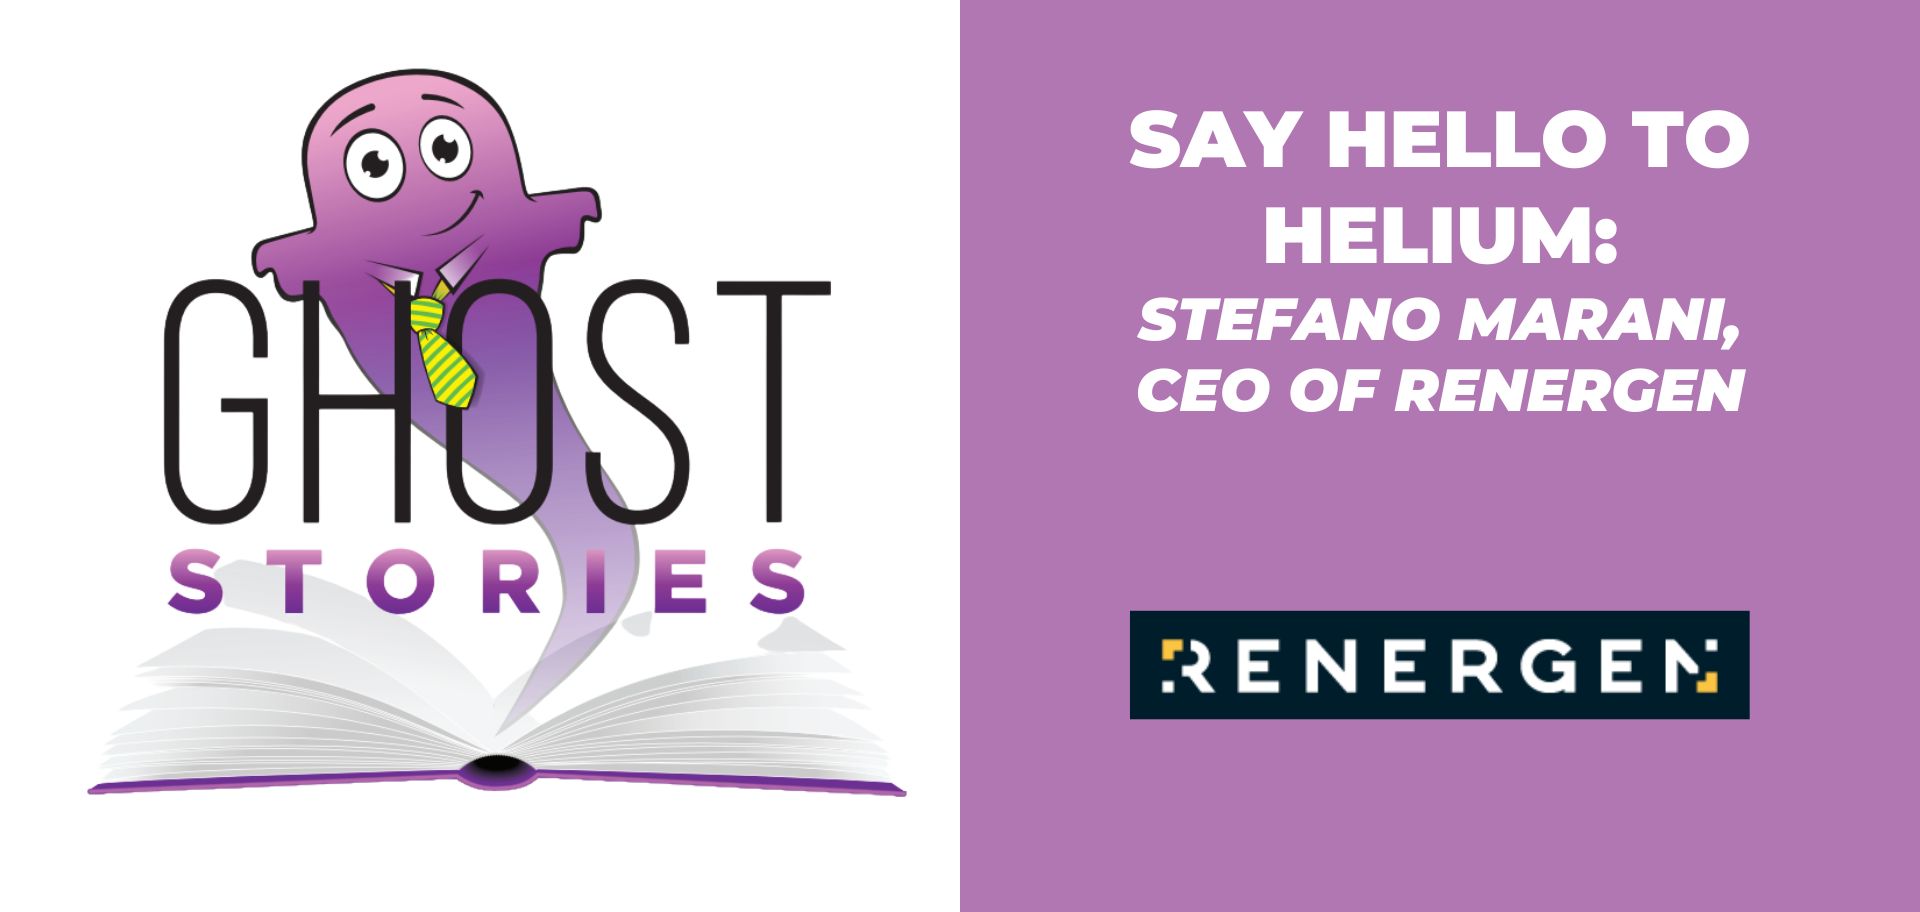 Ghost Stories #6: Say Hello to Helium (Stefano Marani, CEO of Renergen)